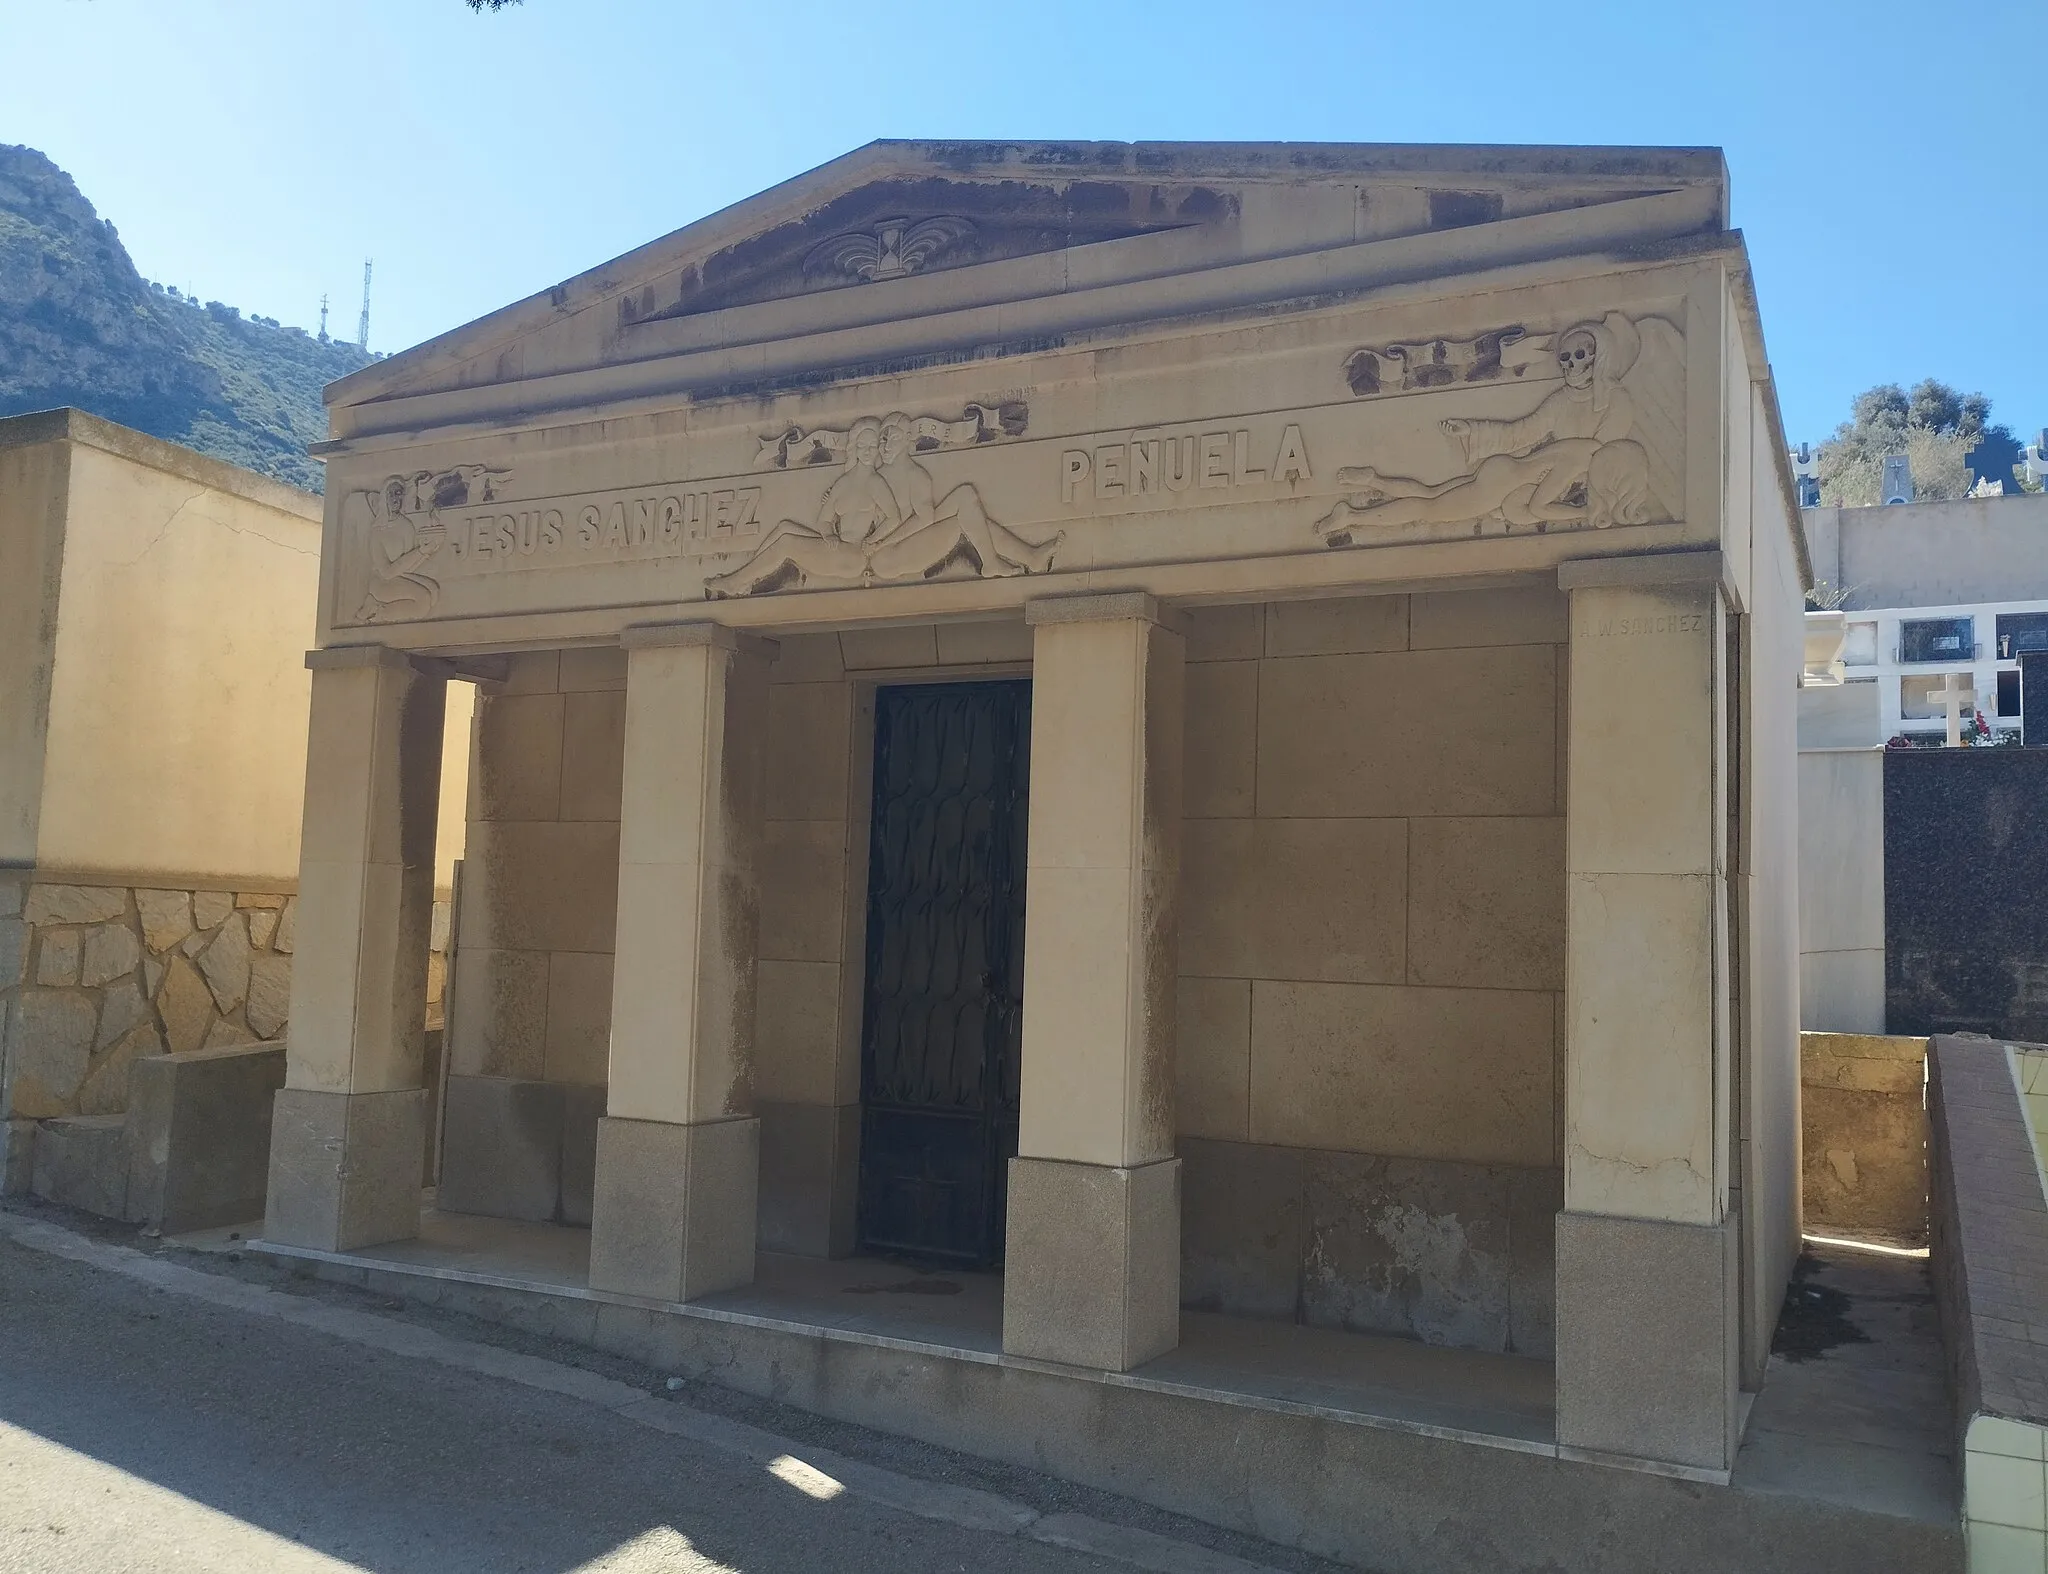 Photo showing: The Mausoleum of the pharmacist Jesús Sánchez Peñuela, in the Los Remedios Cemetery in Cartagena (Spain), is a building that was built in the 1940s or 1950s with the participation of the sculptor Agustín Wenceslao Sánchez Velázquez and an unknown architect. Its tetrastyle facade stands out, with four square columns that support an entablature decorated with allegorical reliefs of life and death, while a winged hourglass is represented on the pediment.